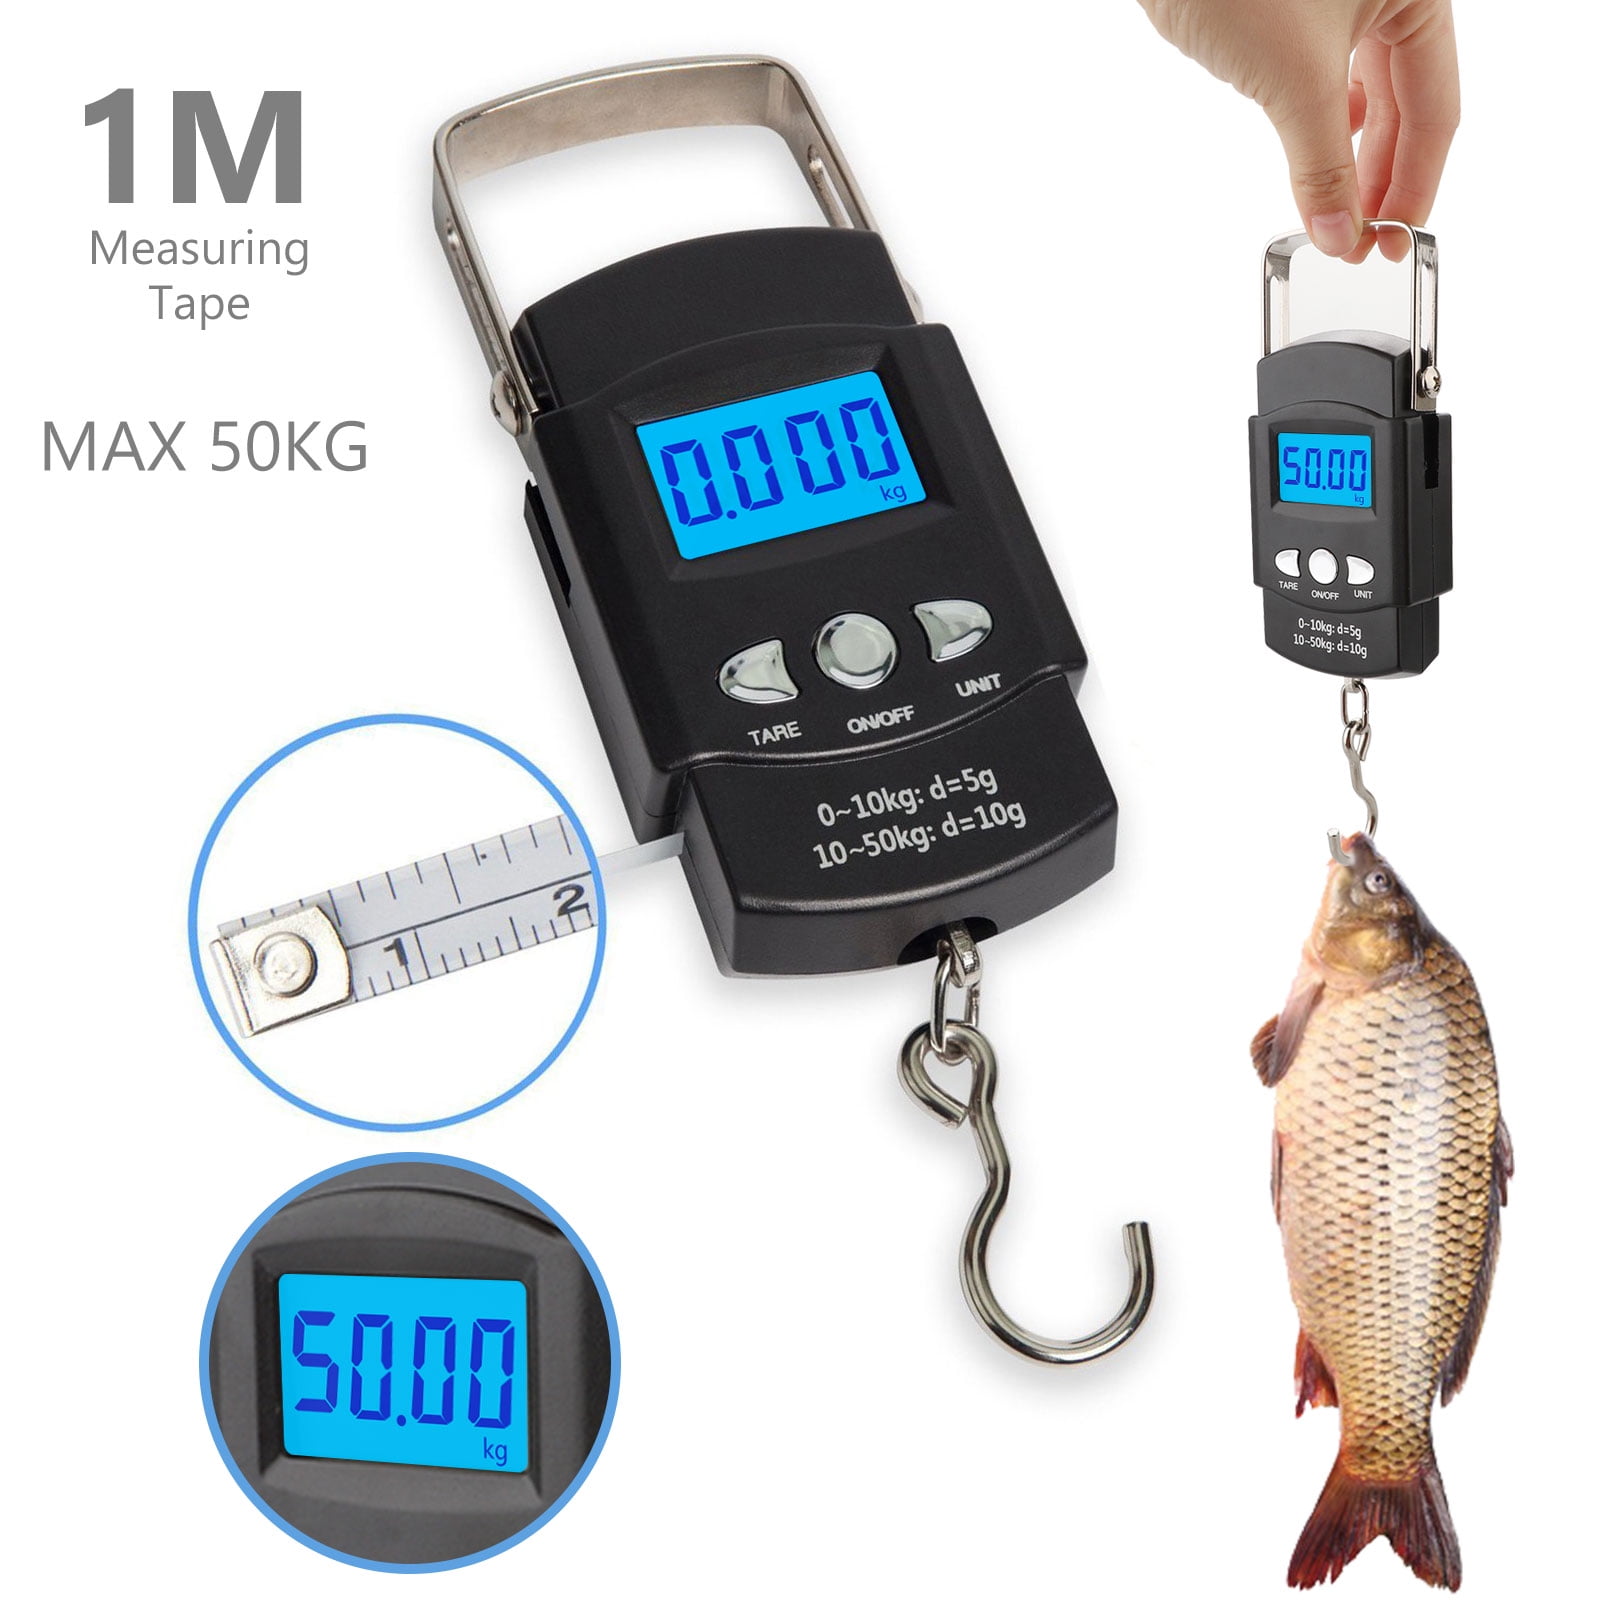 DIGITAL ELECTRONIC CARP FISHING WEIGHING SCALES 110lb/50kg Applied Specialized